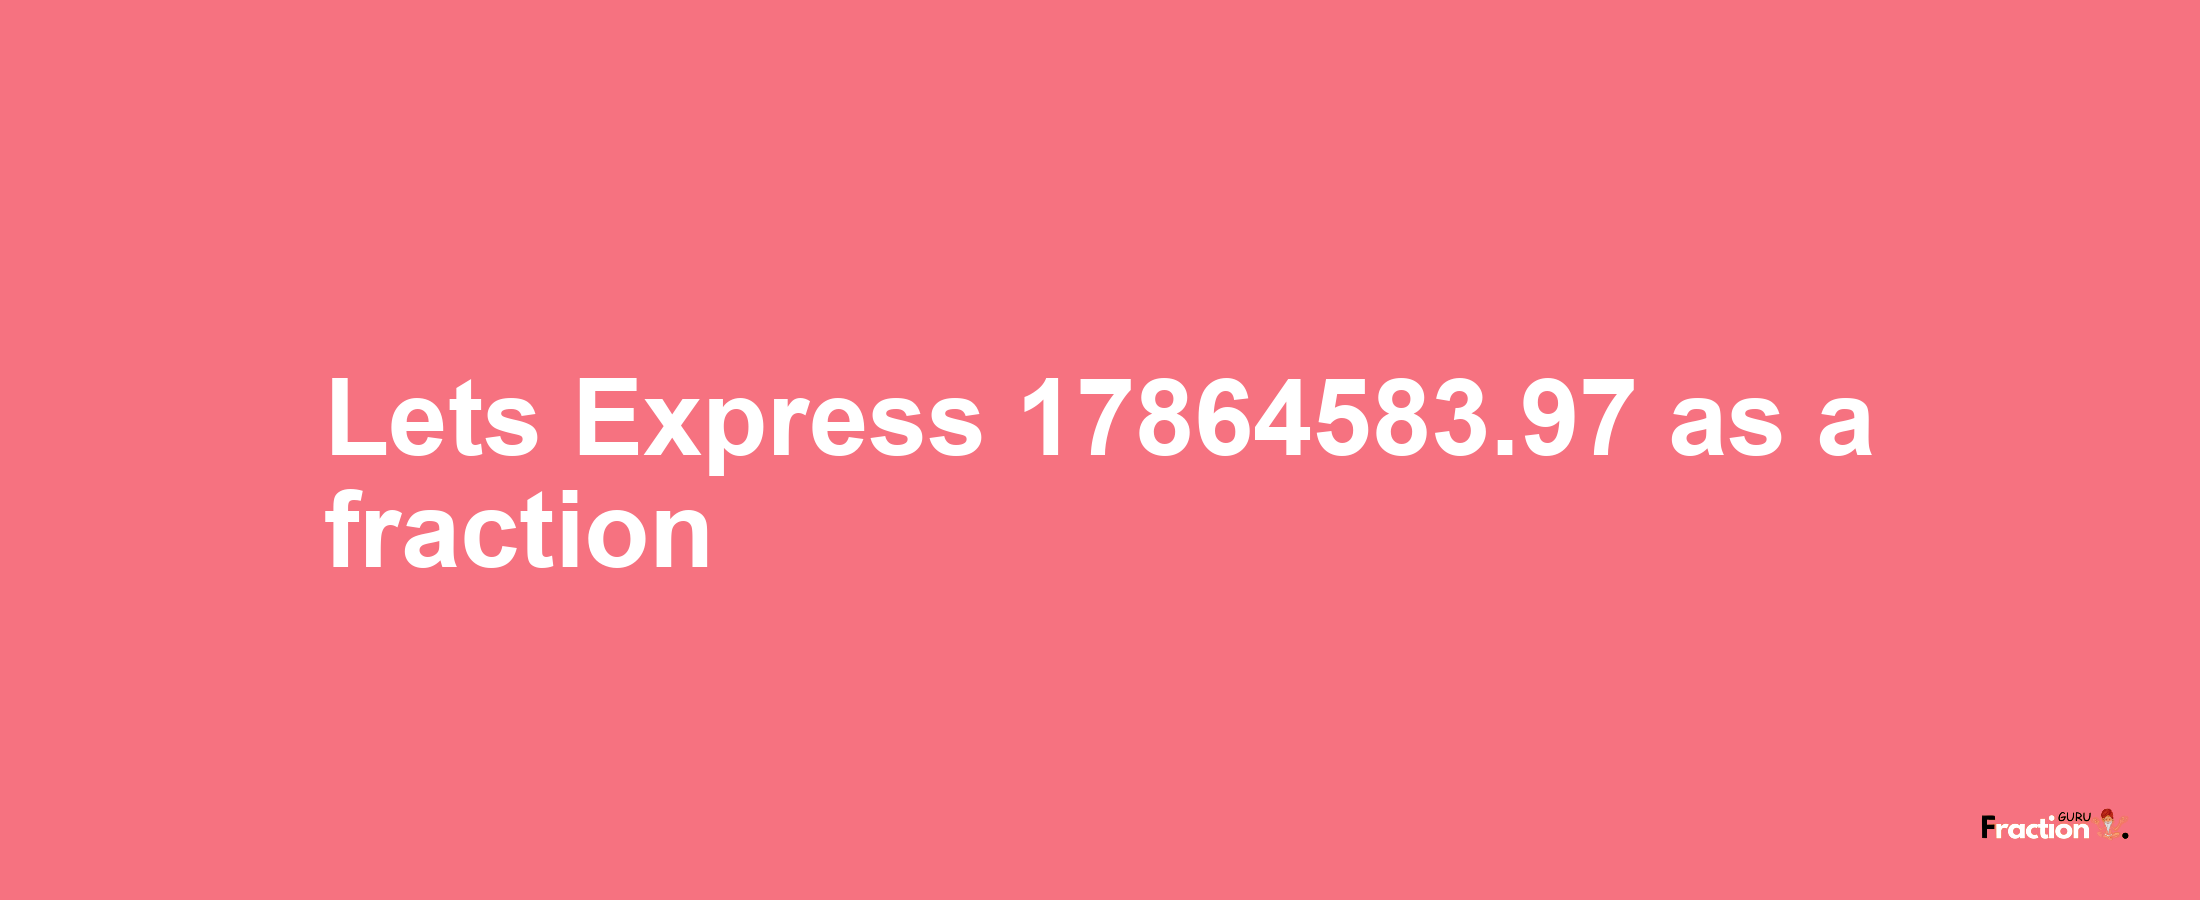 Lets Express 17864583.97 as afraction